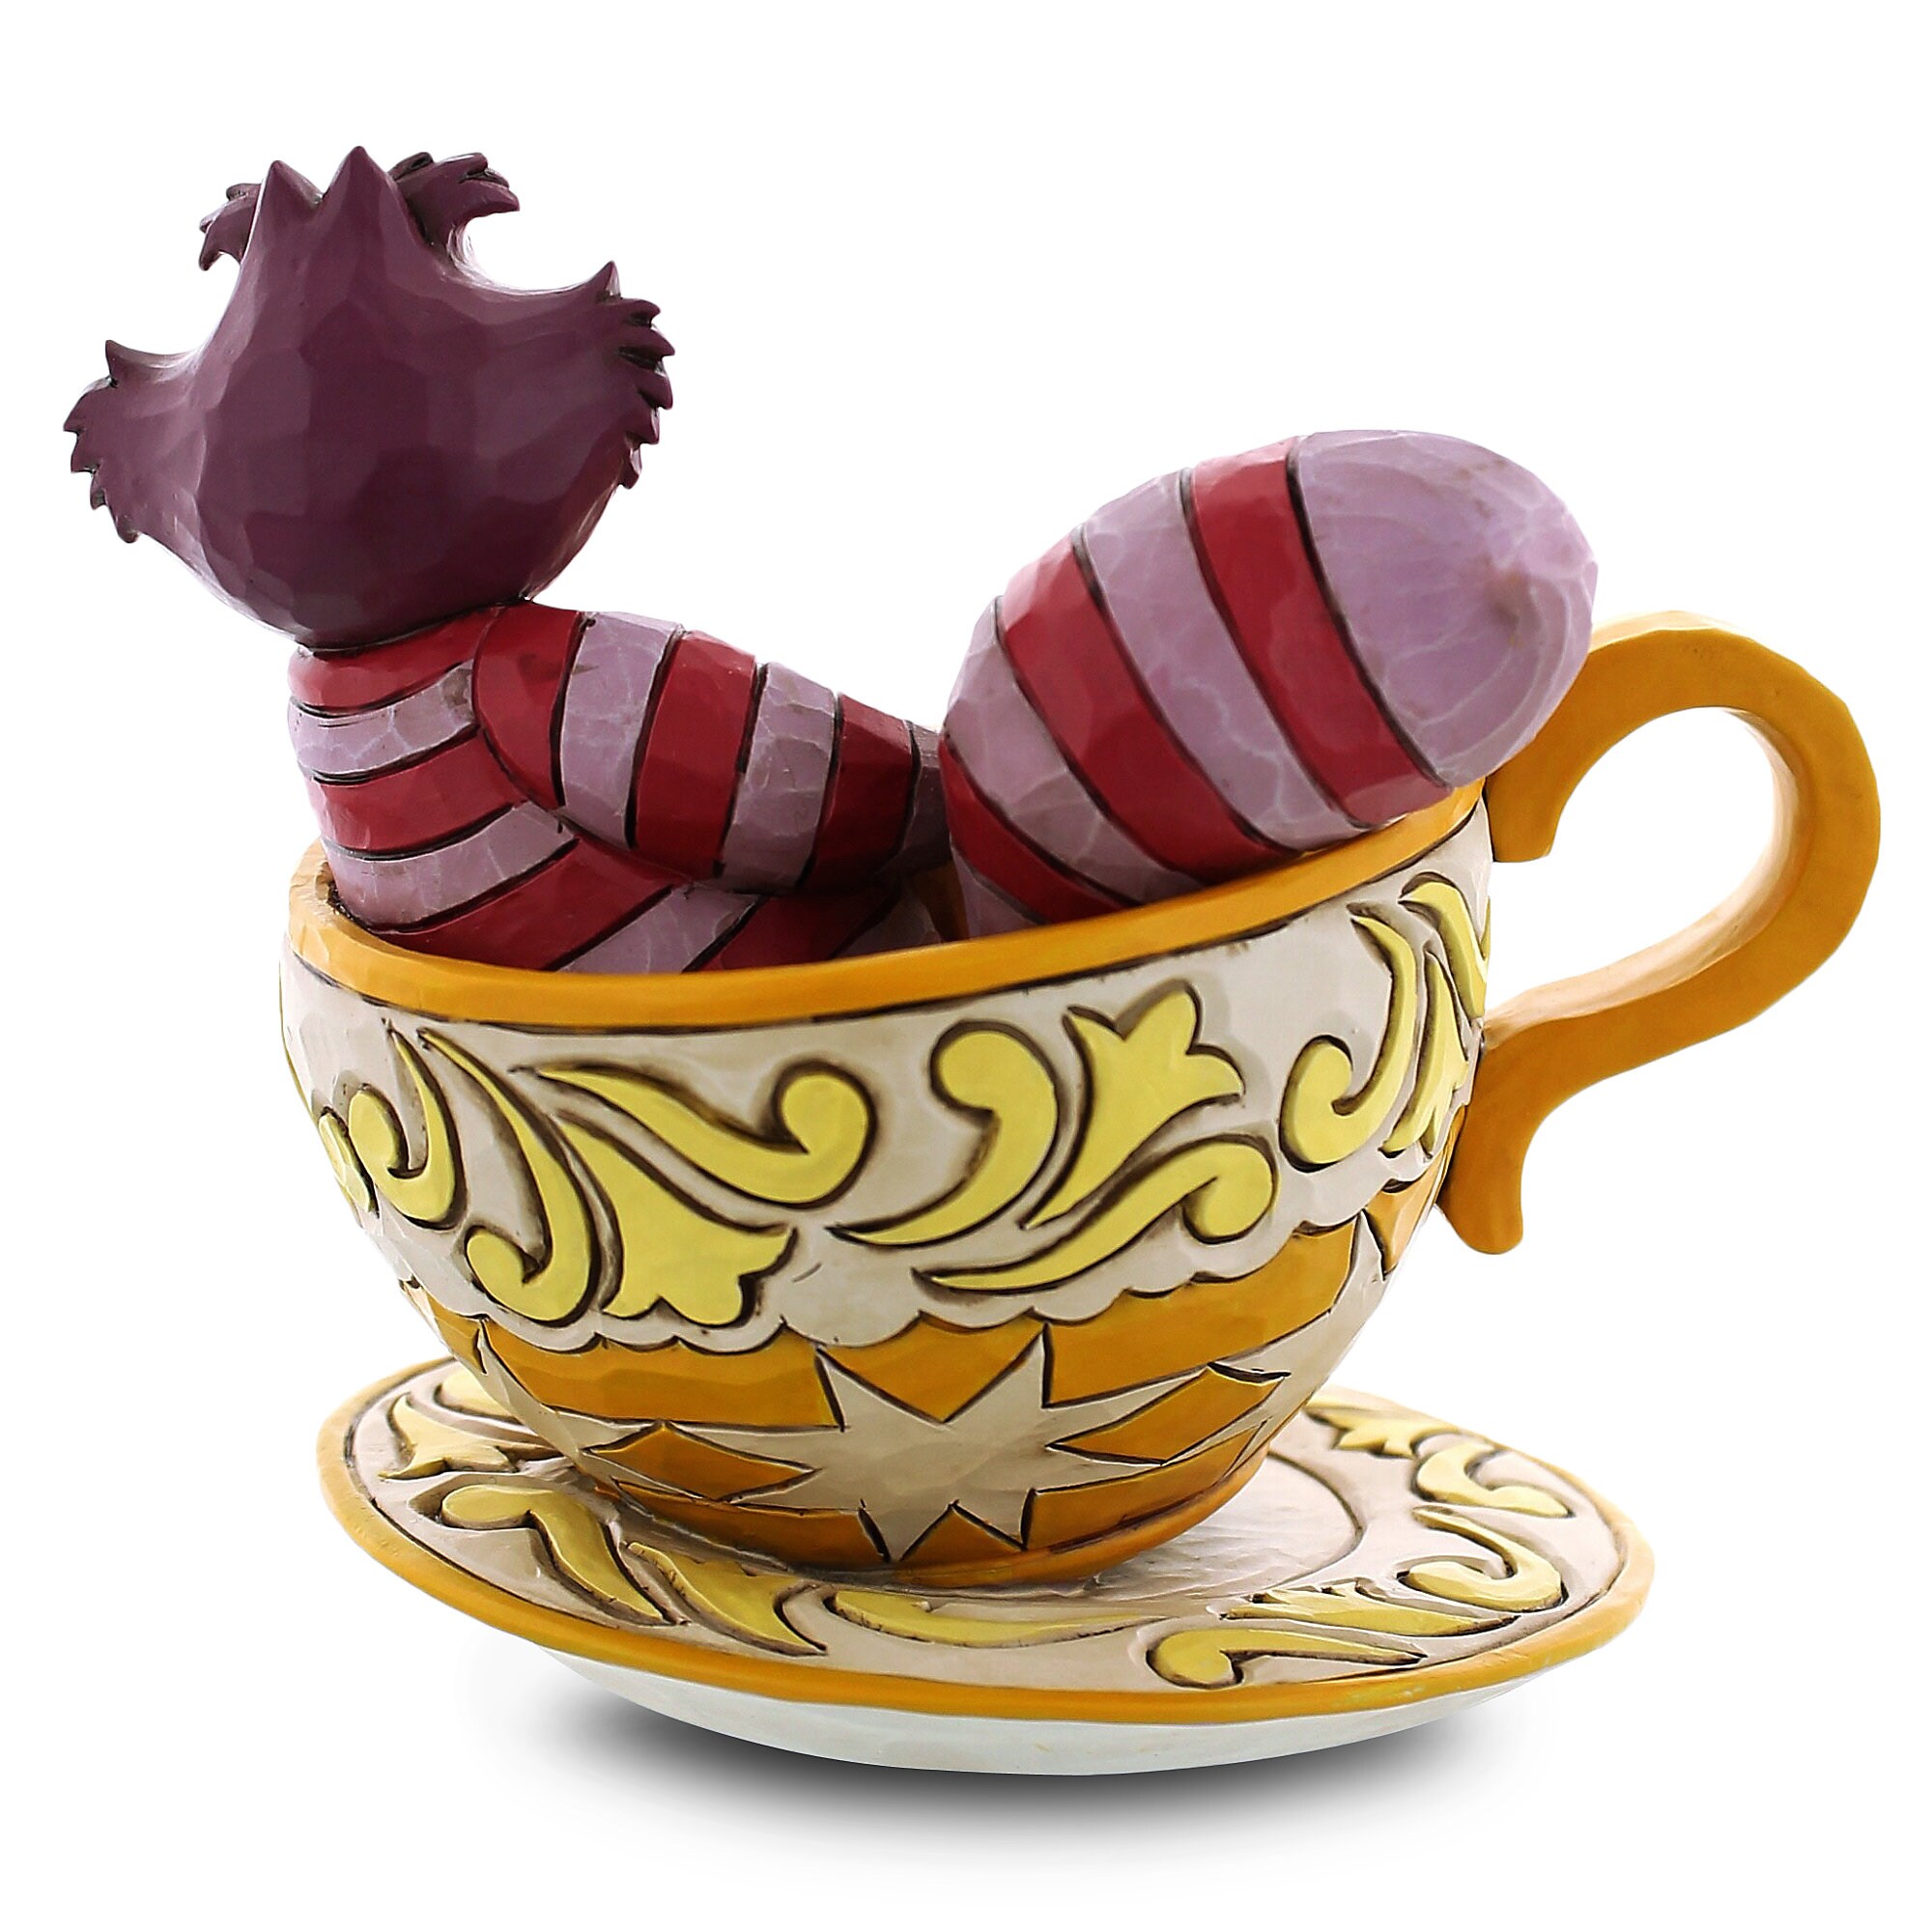 Cheshire Cat in Tea Cup Figure by Jim Shore